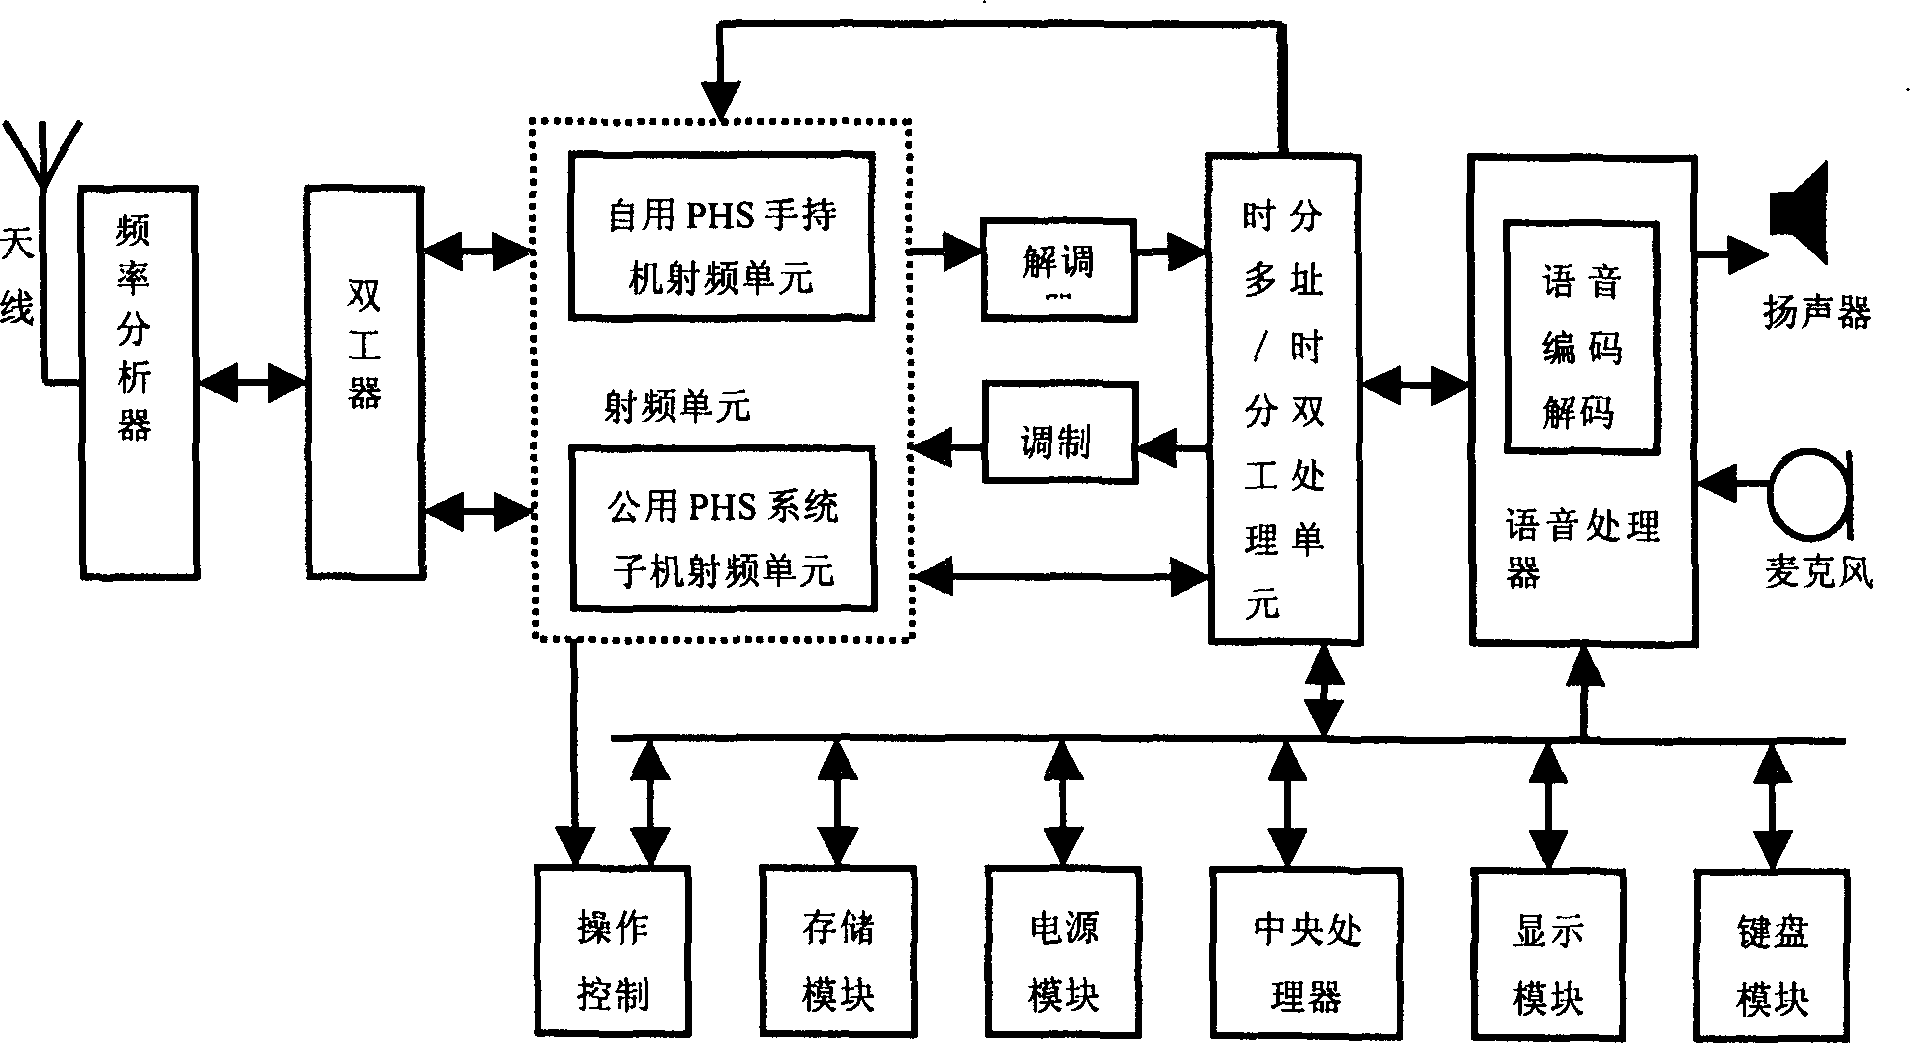 Digit cell-phone telecommunication terminal system